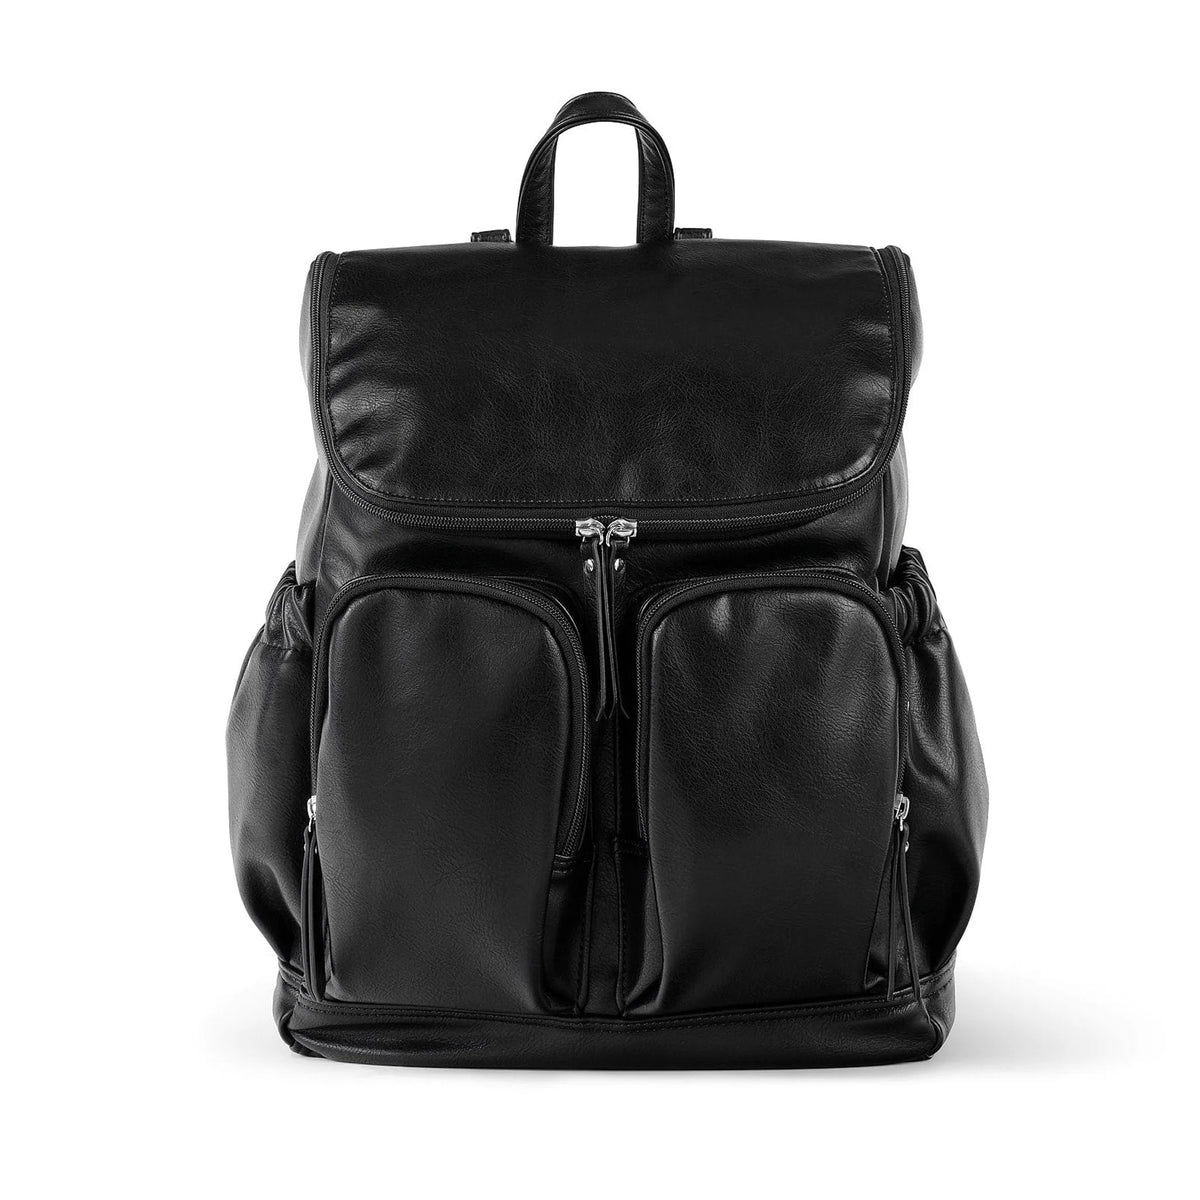 OiOi Signature Nappy Backpack Faux Leather - Black